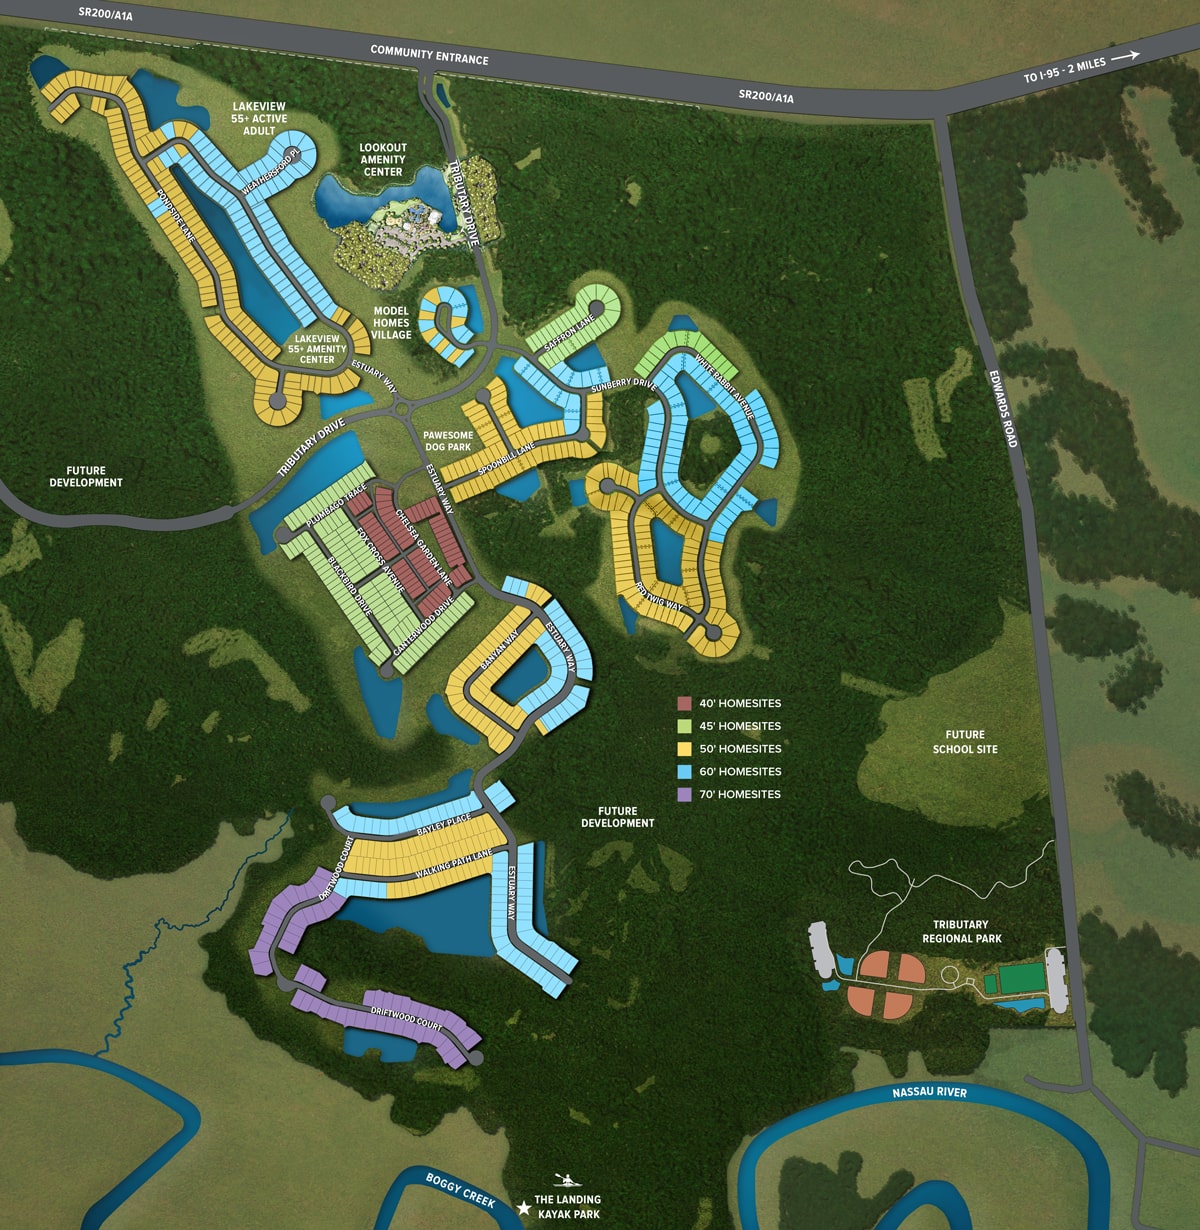 tributary master site plan of the community